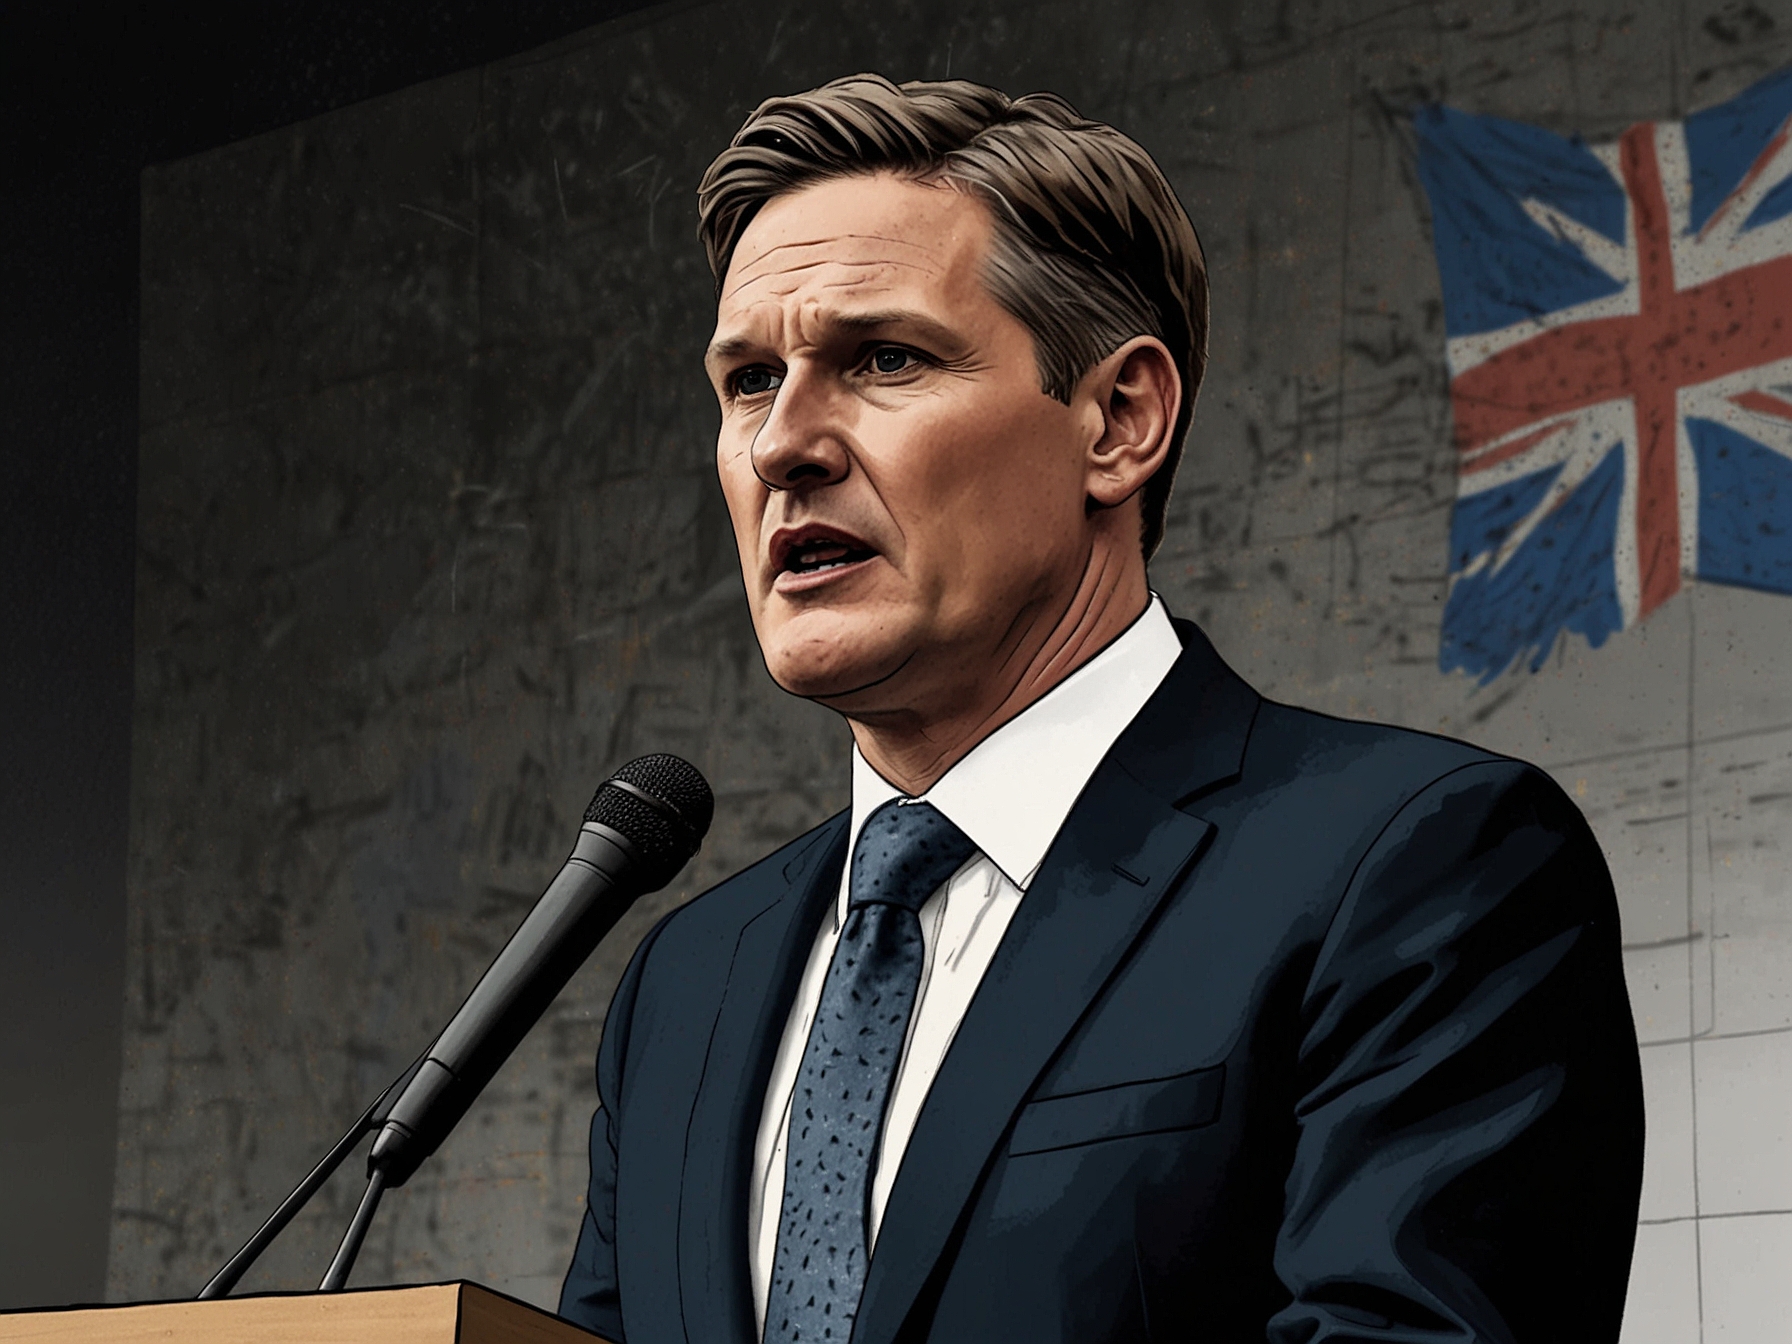 An image of Keir Starmer delivering his speech, emphasizing the UK’s focus on post-Brexit recovery and collaboration with European neighbors without rejoining the EU.